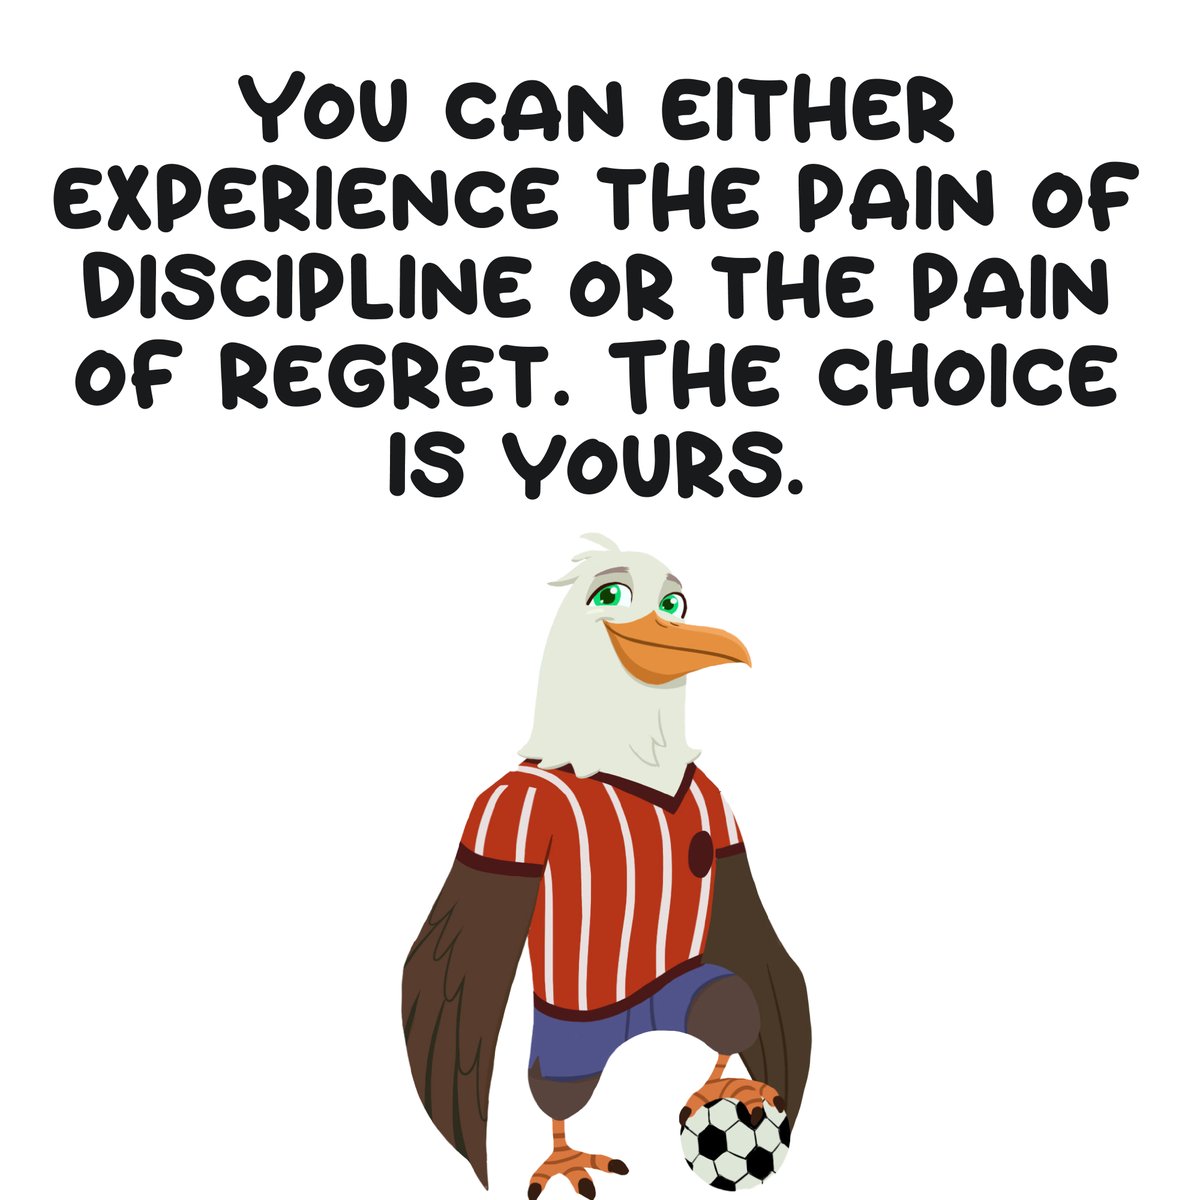 Choose wisely. #motivation #quote #choosewisely #pain #regret #discipline